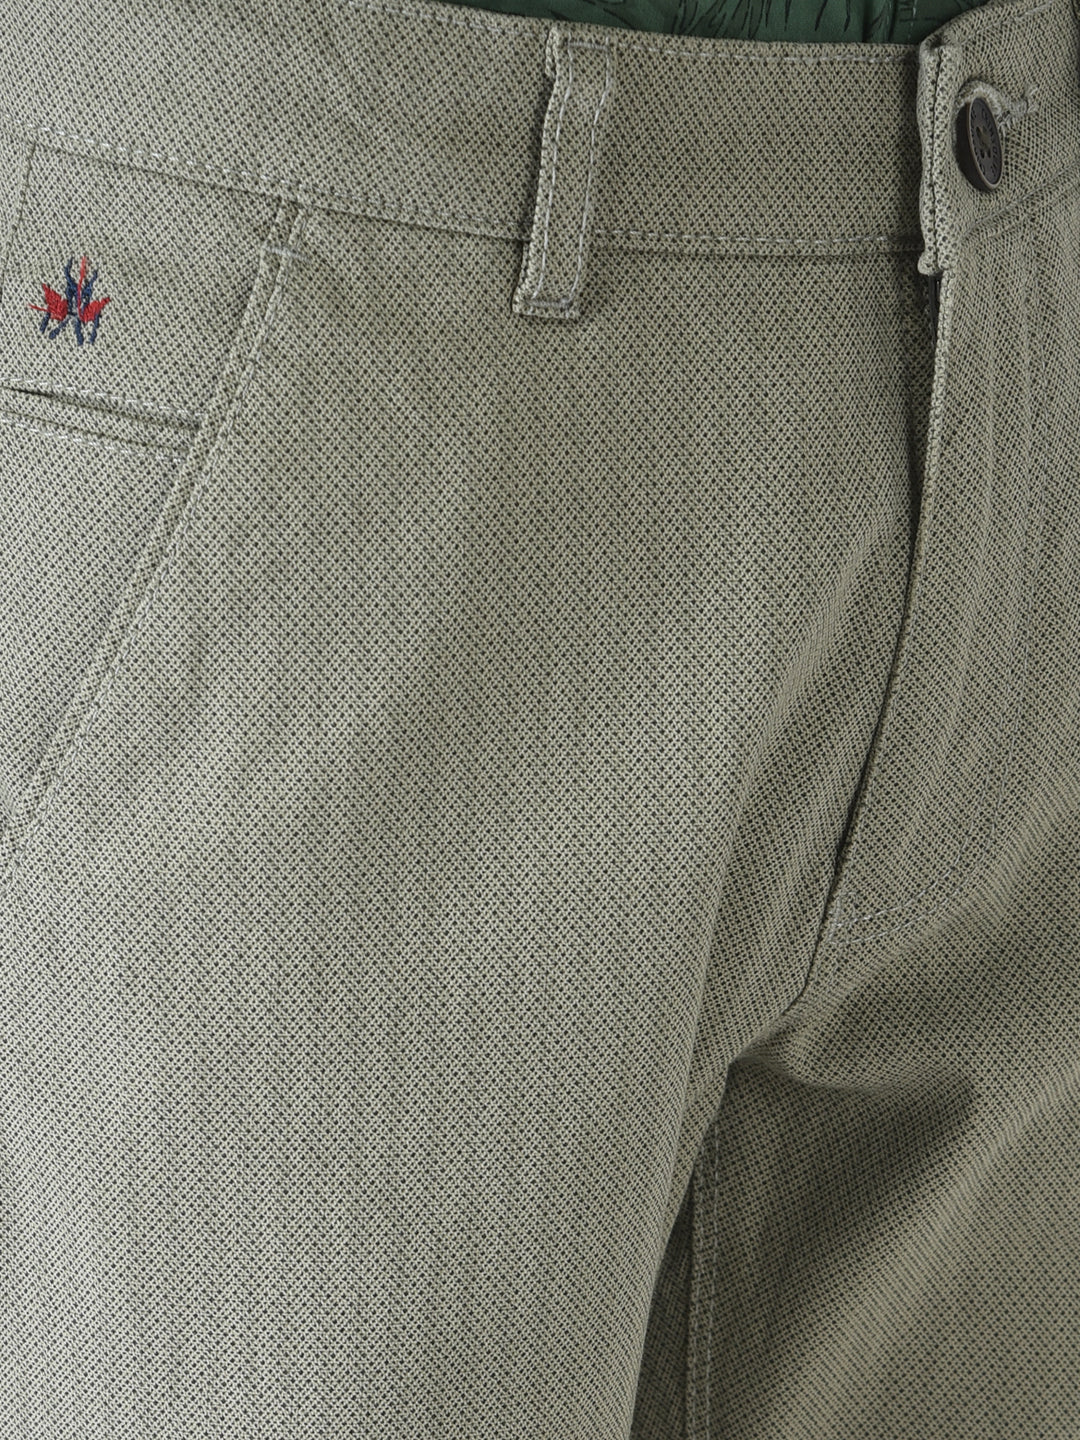 Green Textured Trousers-Boys Trousers-Crimsoune Club